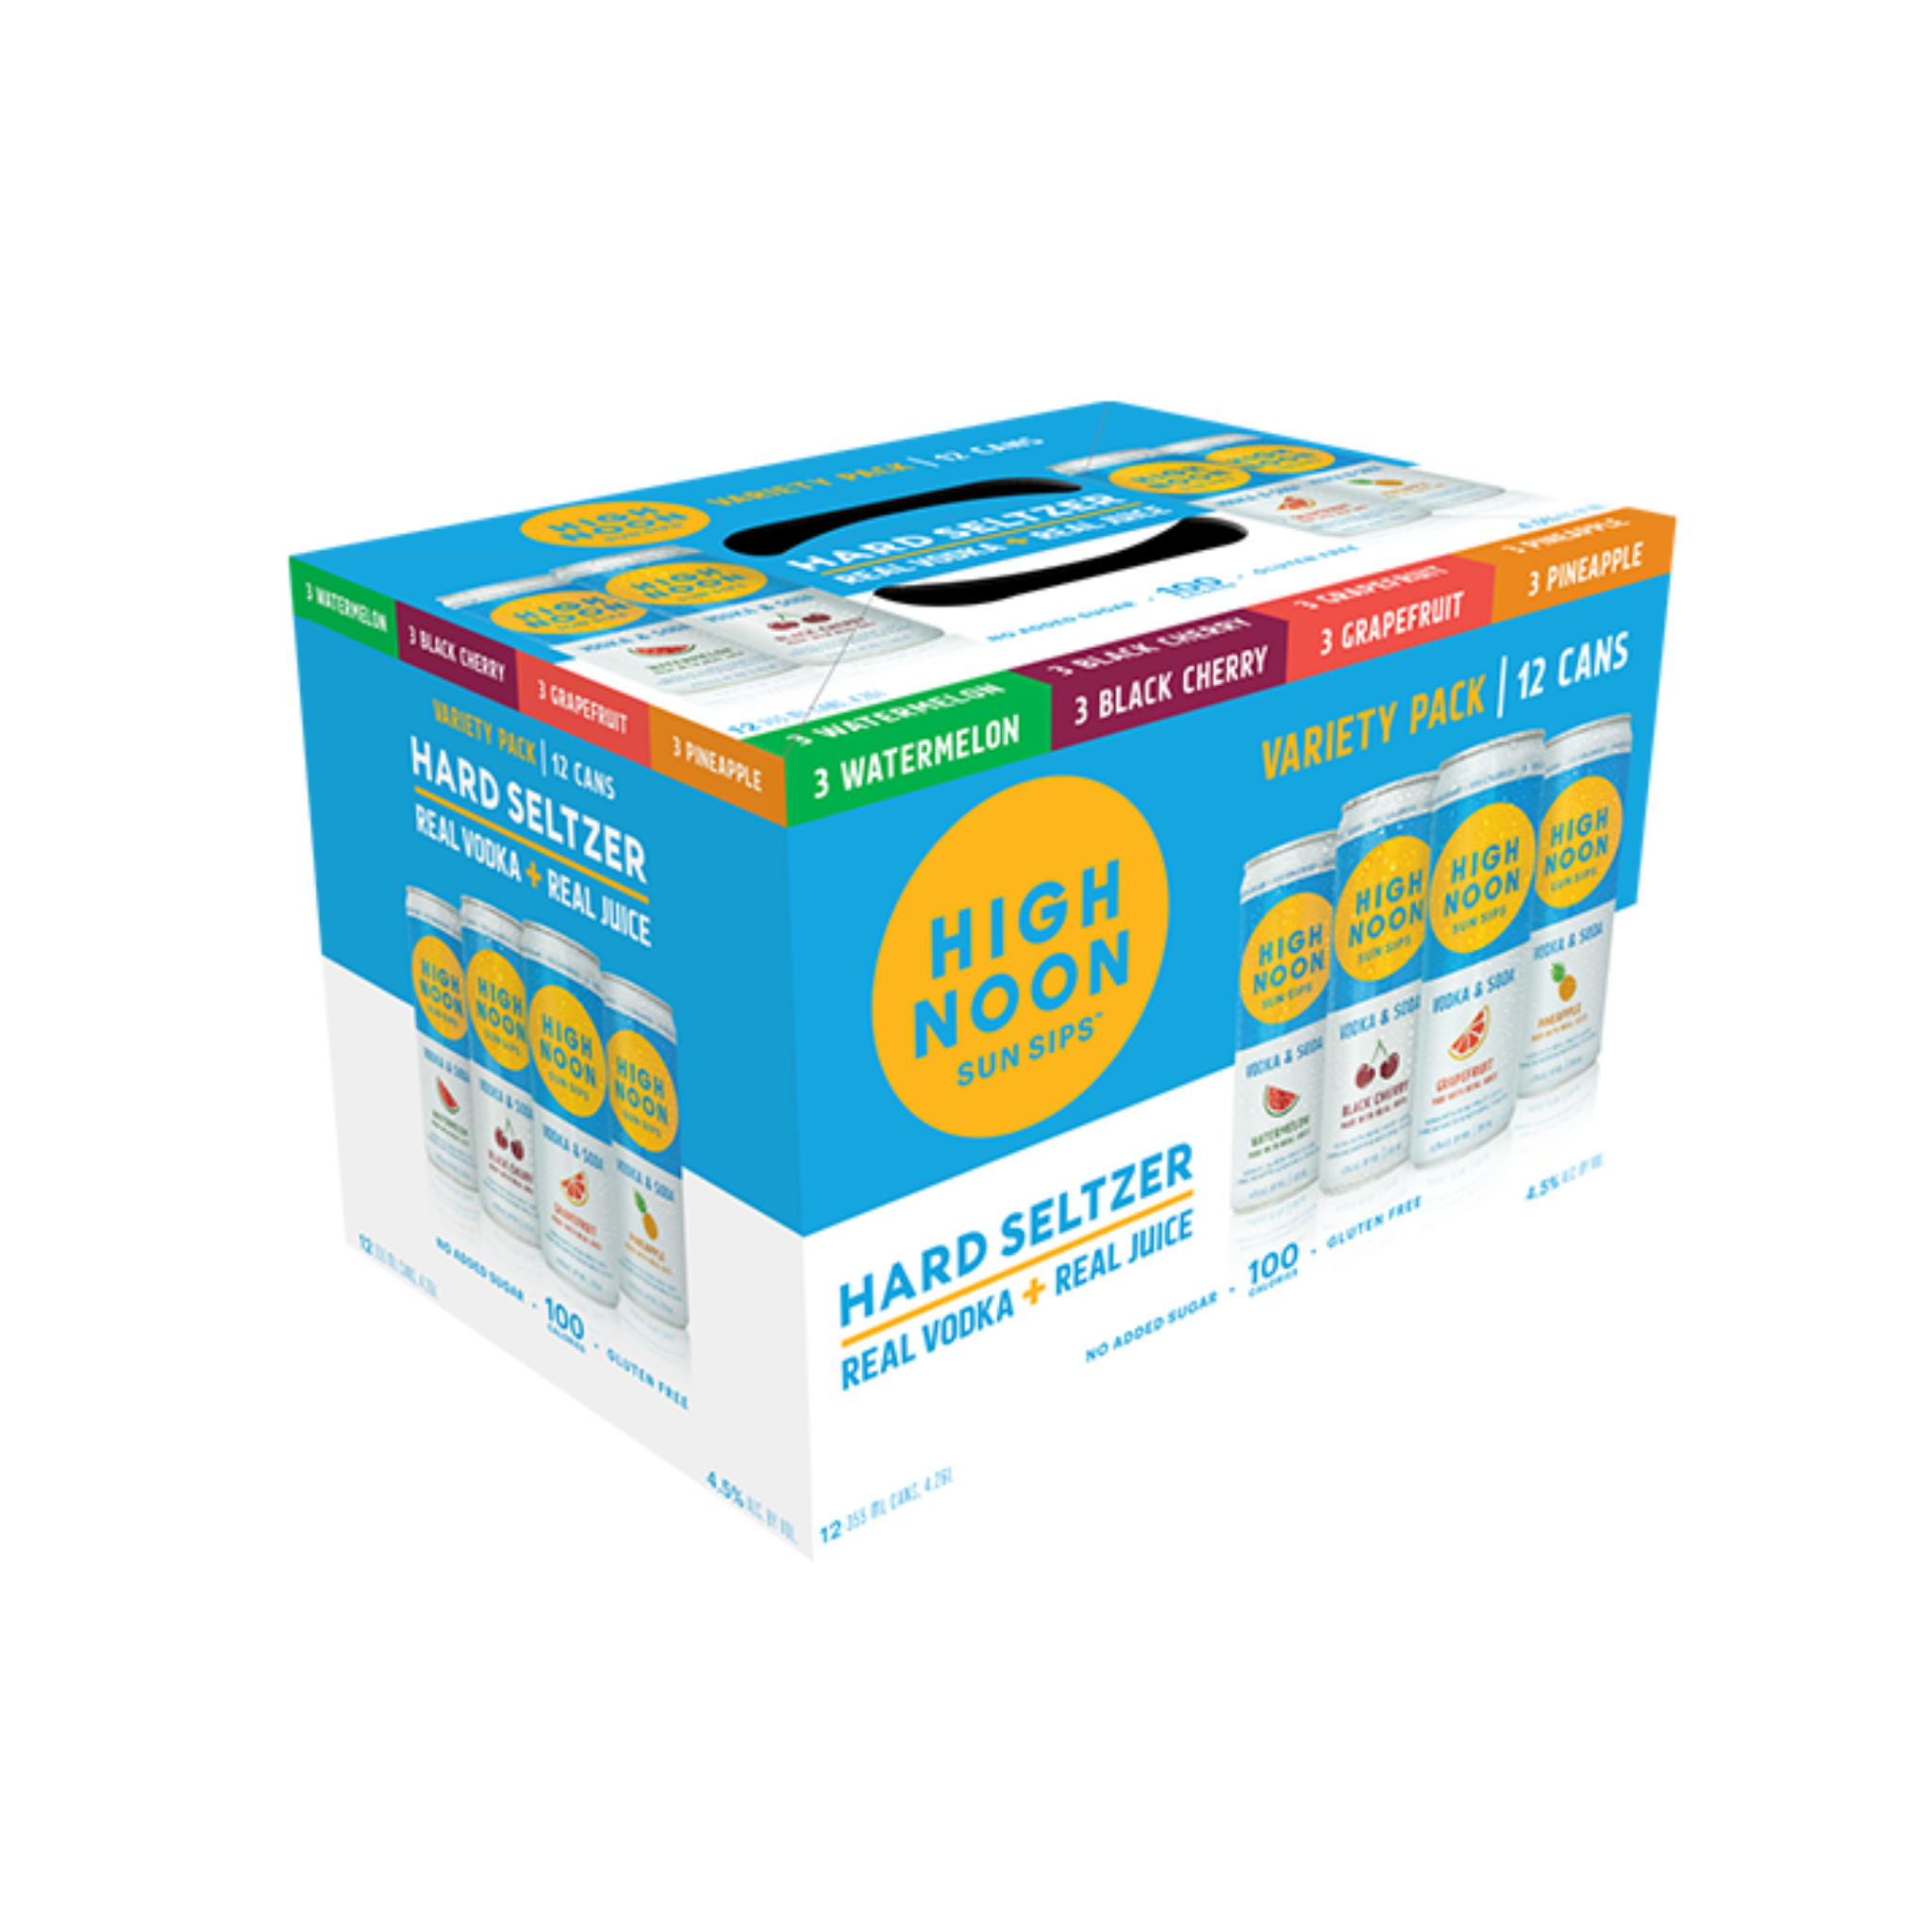 High Noon Sun Sips Variety 12 Pack